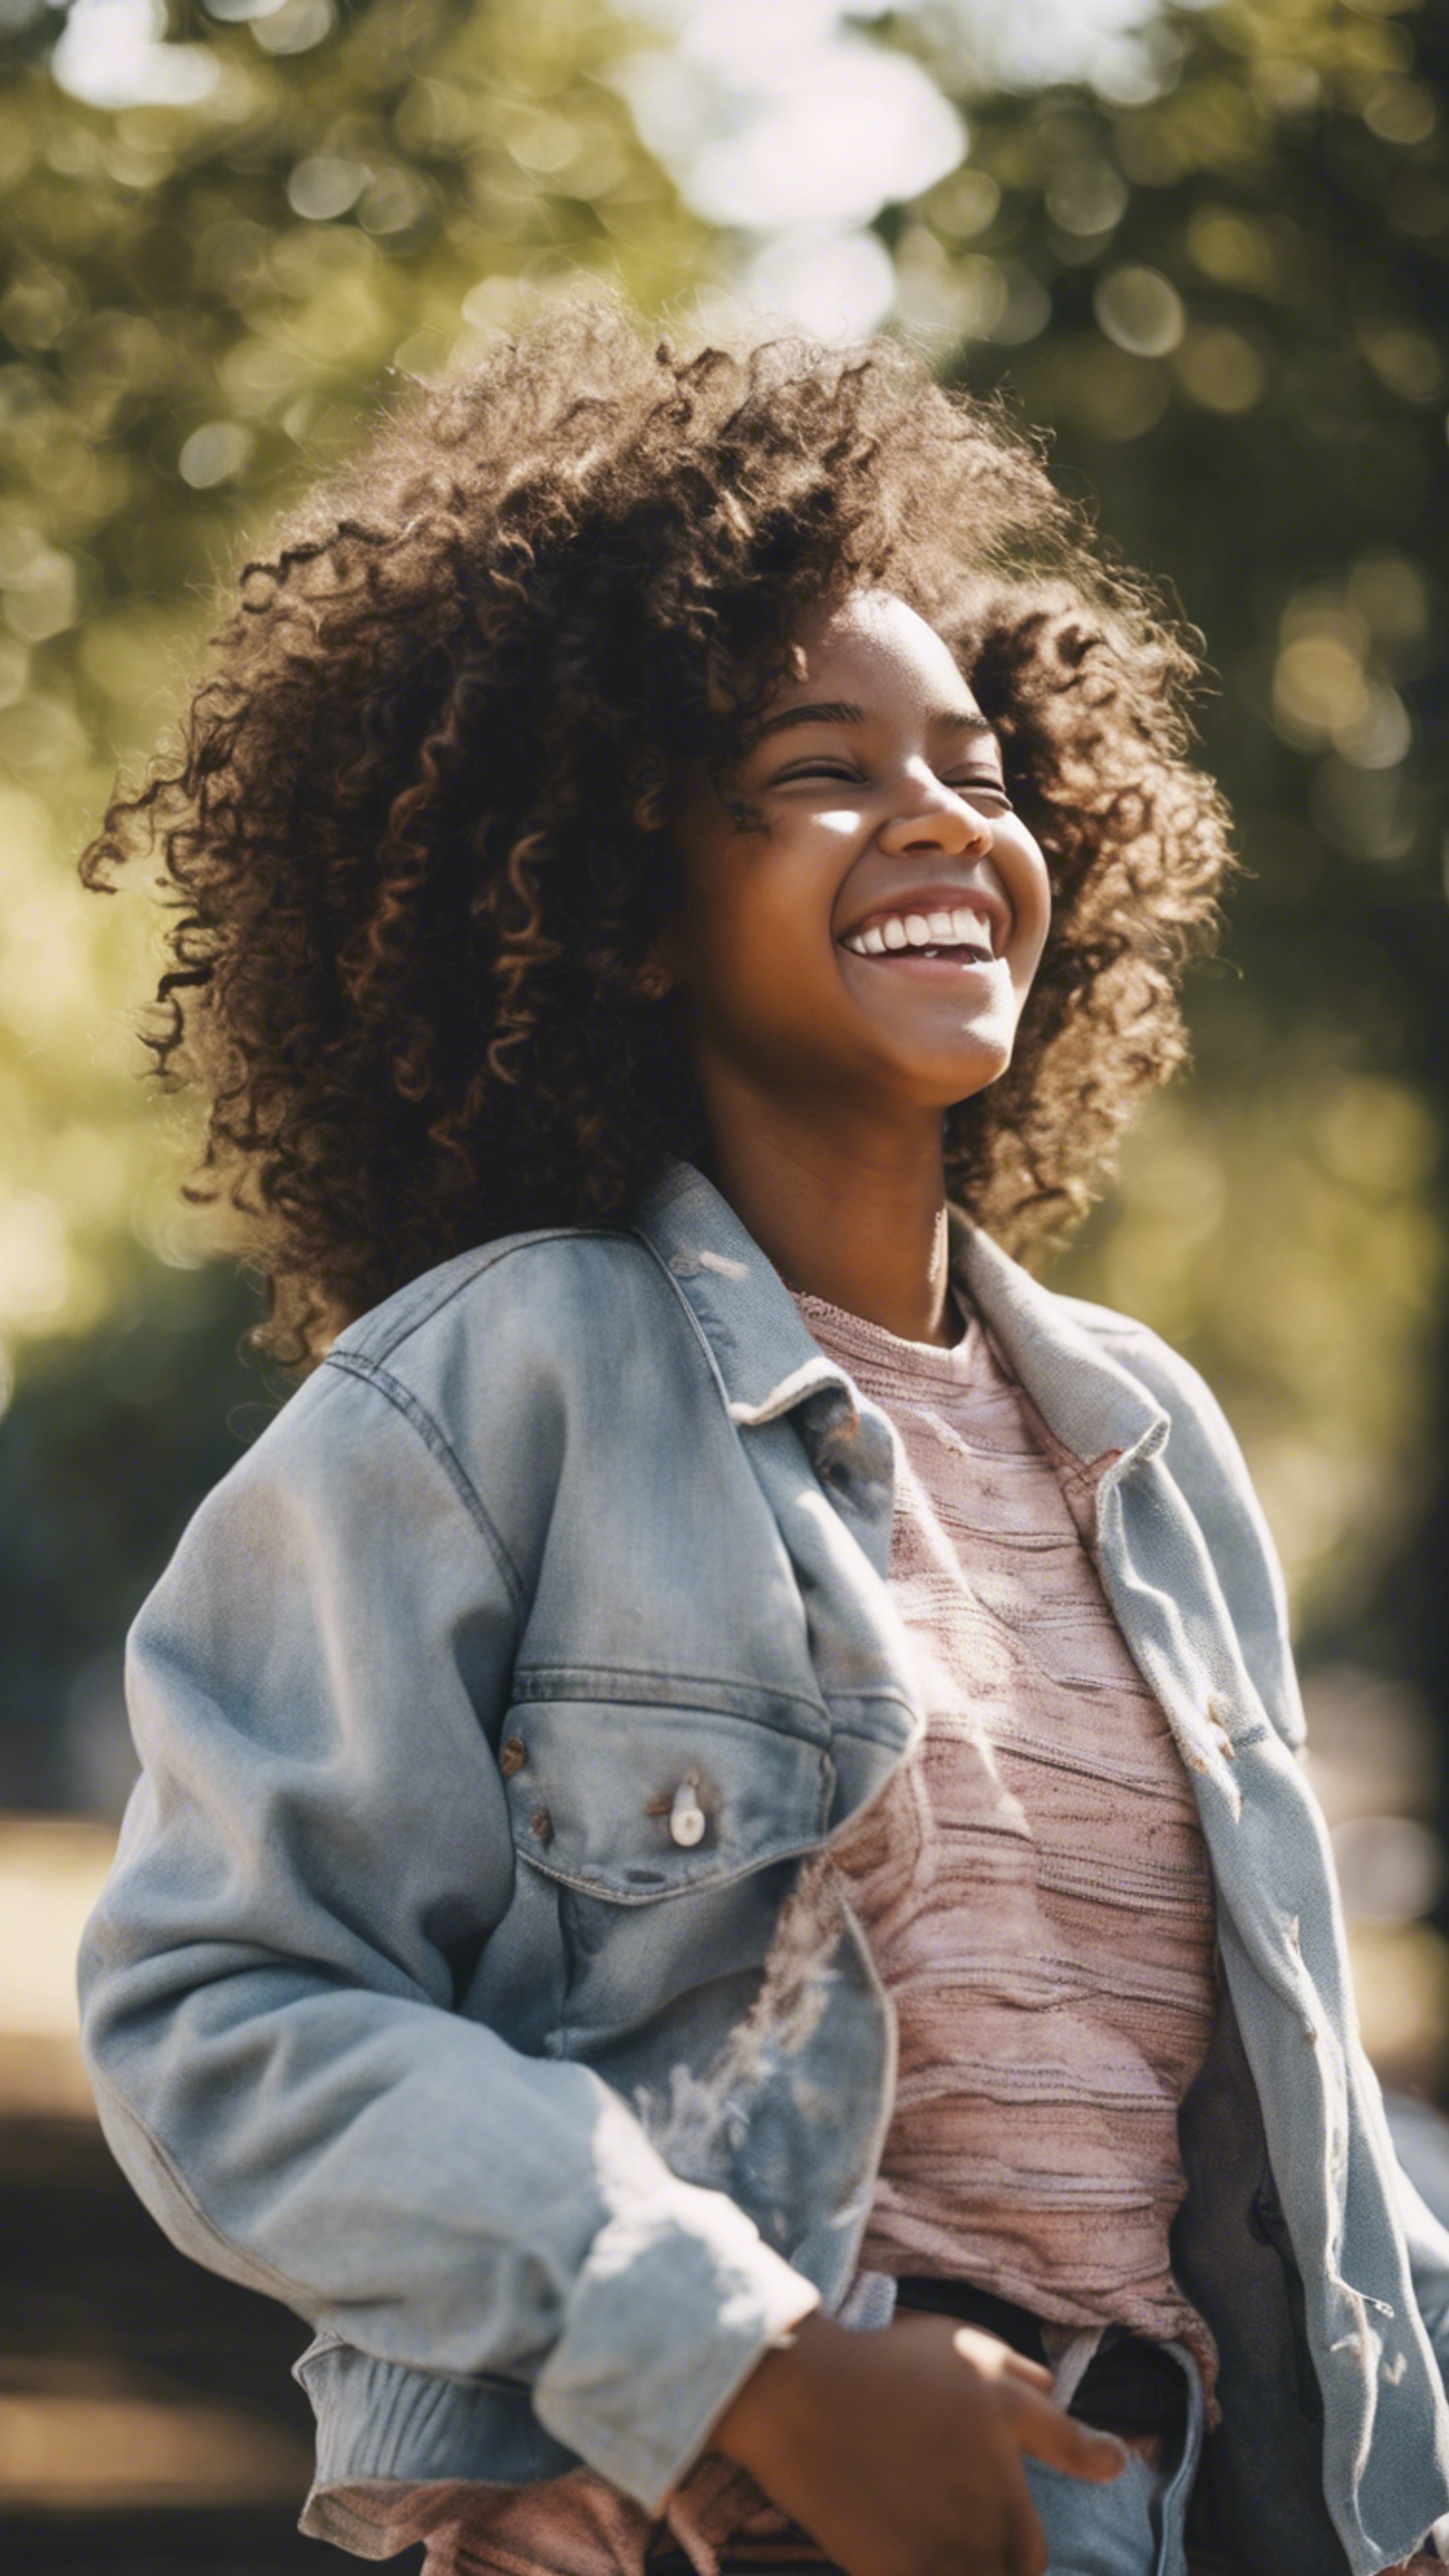 A confident young black girl with big, curly hair laughing while playing in a city park during a sunny afternoon. ورق الجدران[a9bacc30abb04d56bfae]